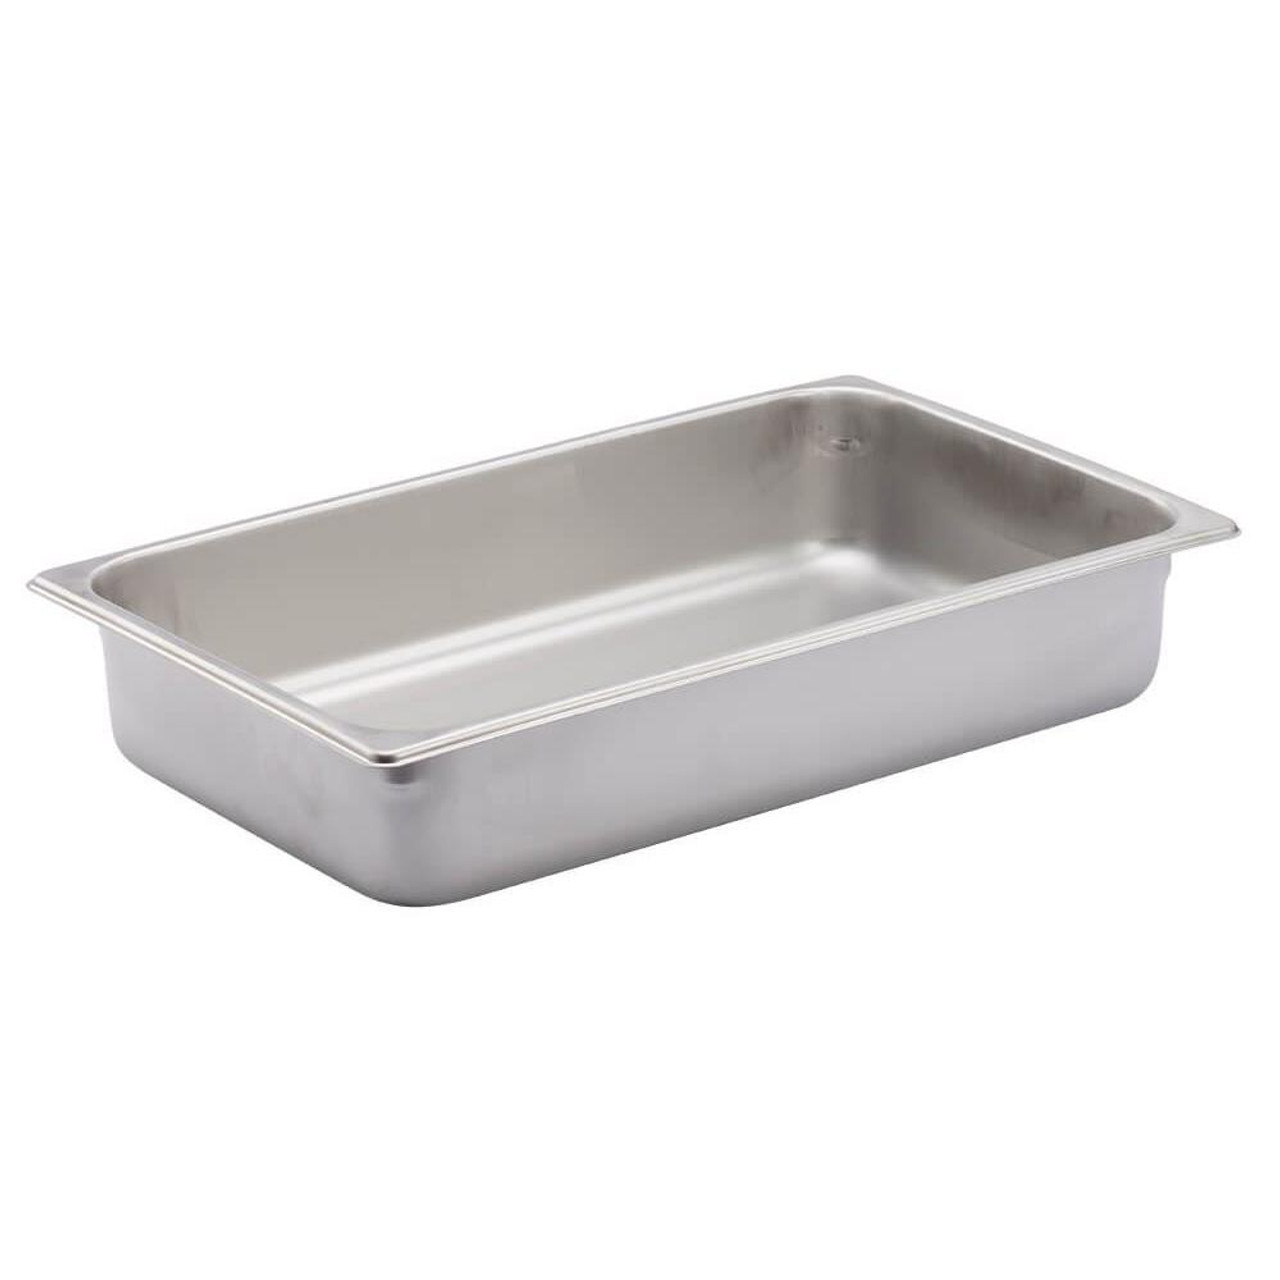 https://cdn11.bigcommerce.com/s-zgzol/images/stencil/1280x1280/products/9120/238500/gilson-company-stainless-steel-pan-rectangular-14qt__06904.1700978432.jpg?c=2